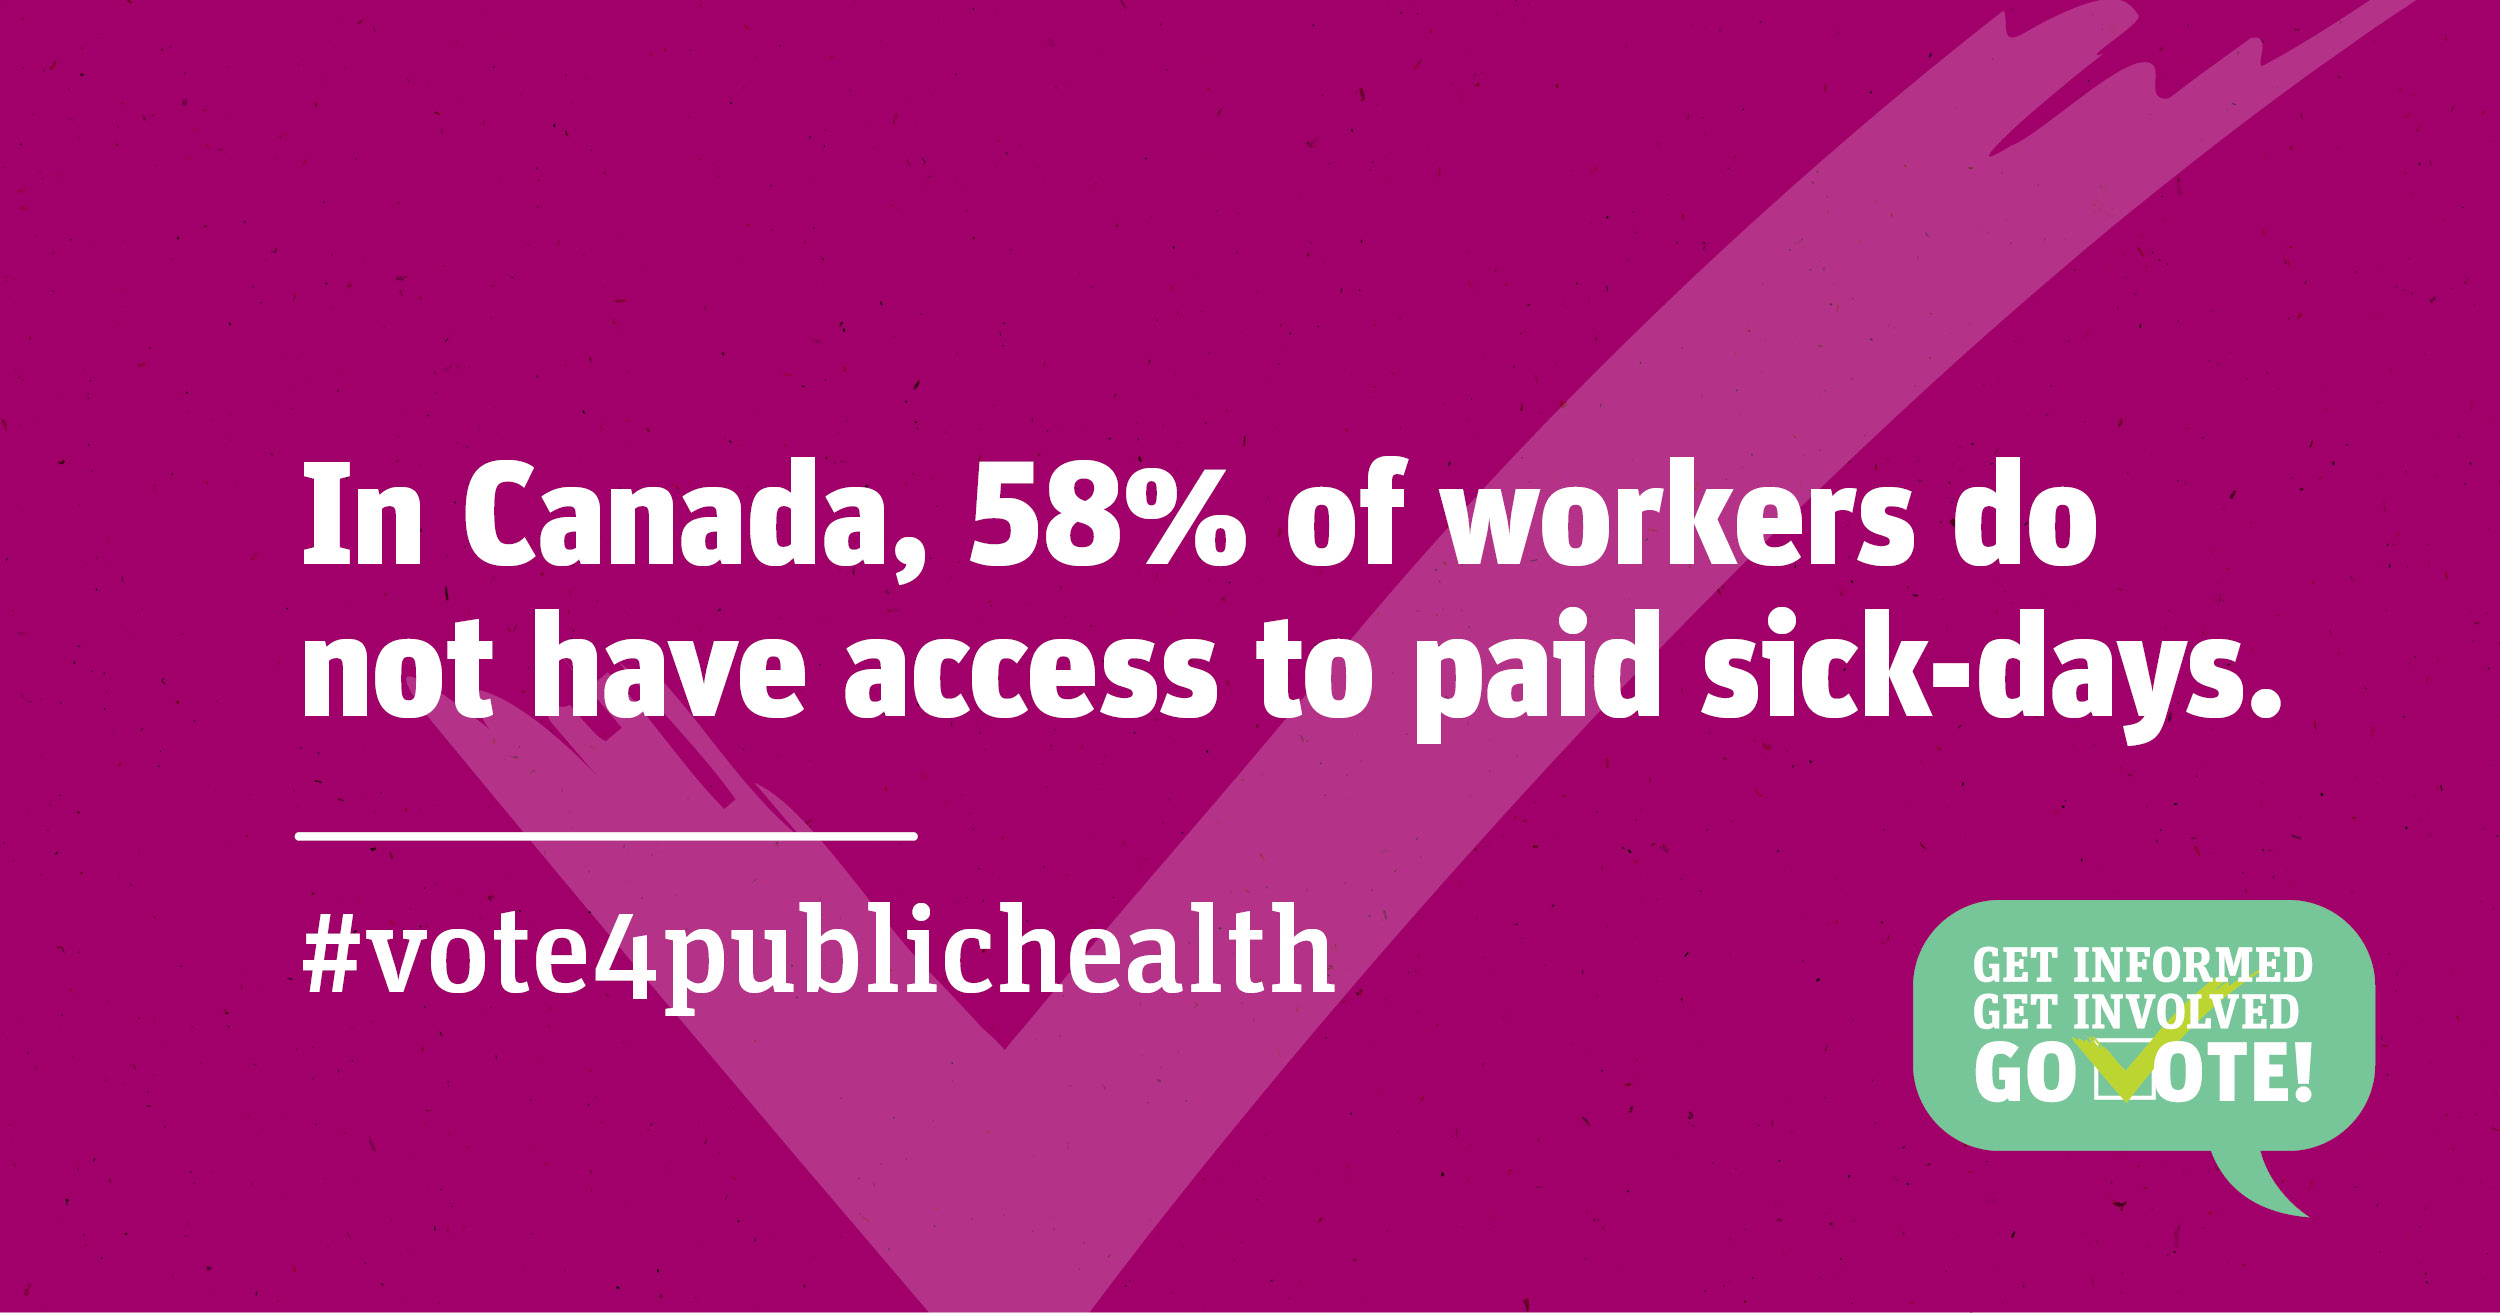 In Canada, 58% of workers do not have access to paid sick-days.